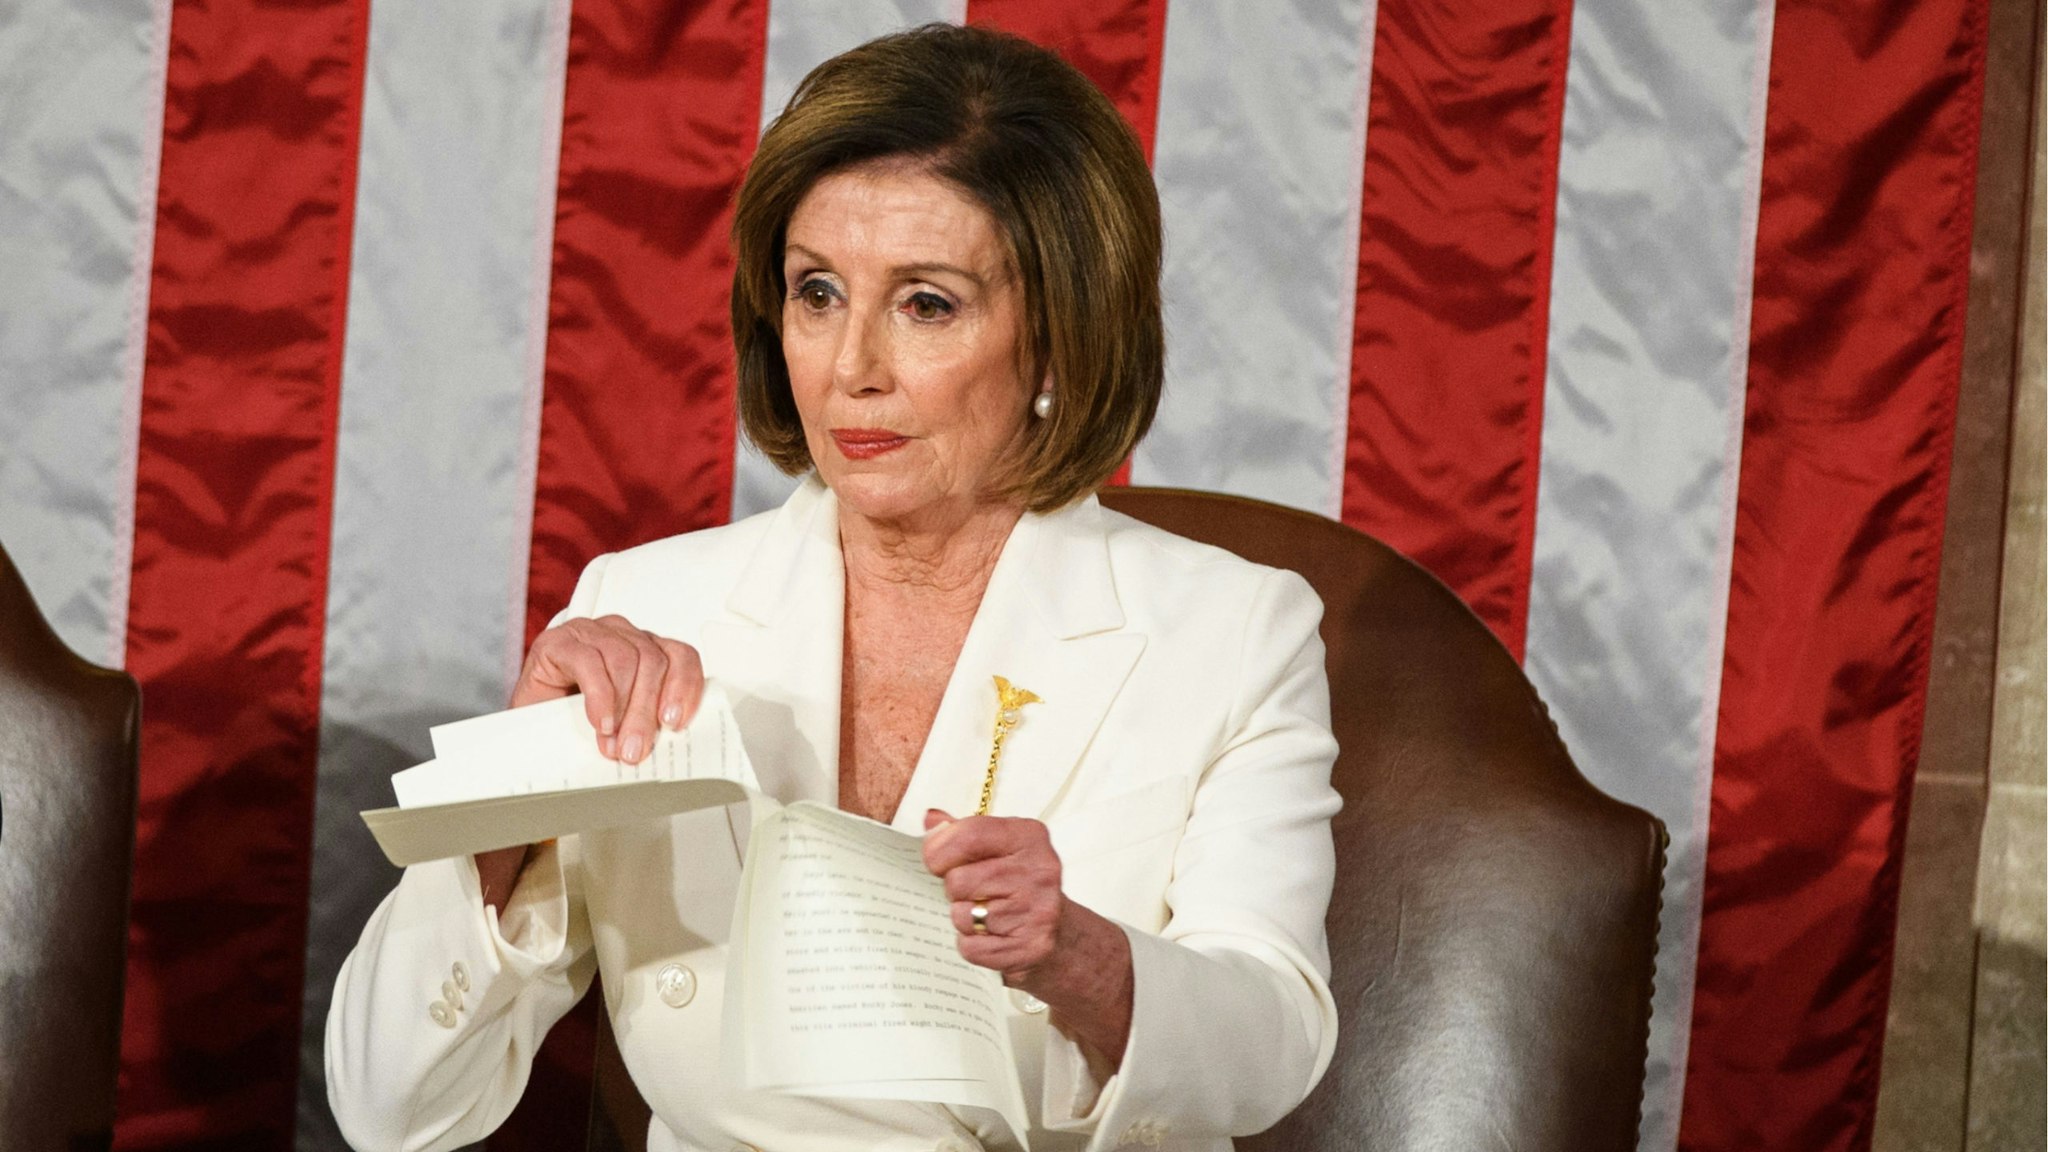 Speaker of the US House of Representatives Nancy Pelosi rips a copy of US President Donald Trumps speech after he delivers the State of the Union address at the US Capitol in Washington, DC, on February 4, 2020.